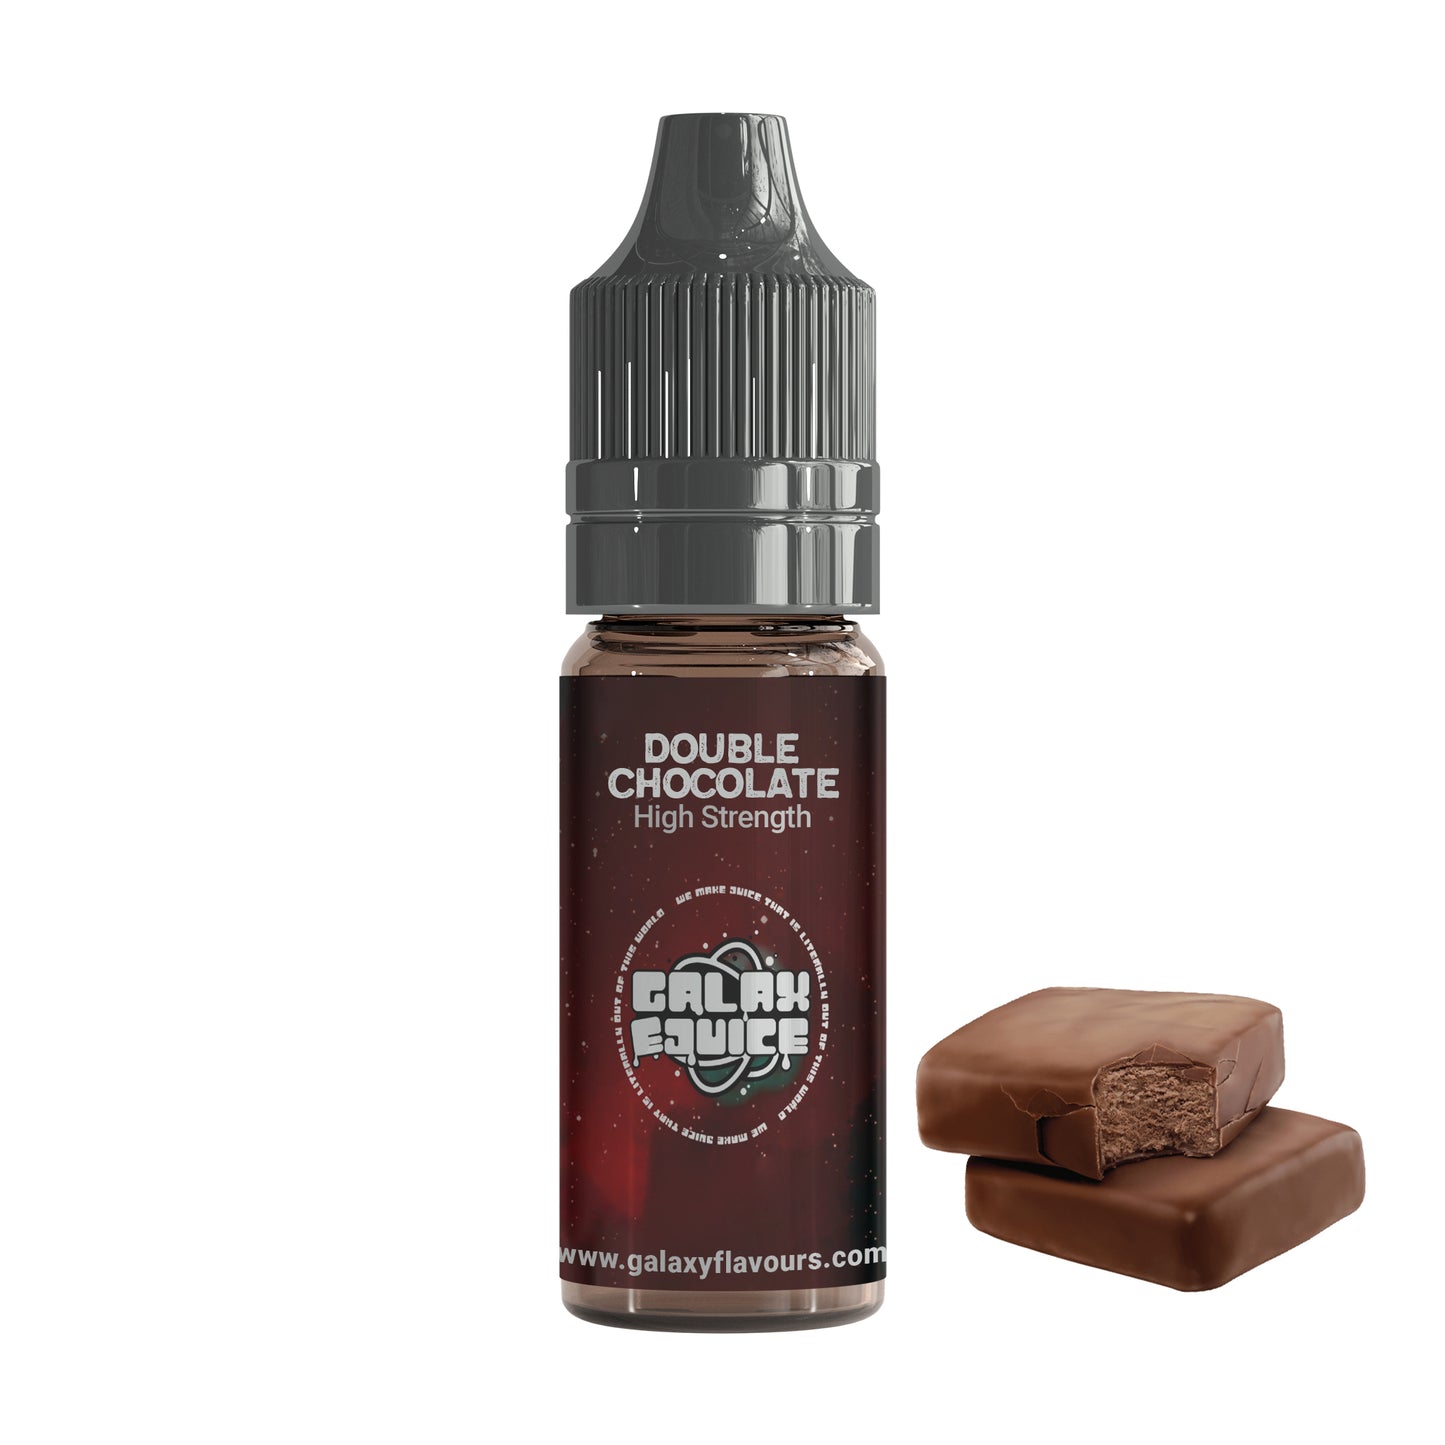 Double Chocolate High Strength Professional Flavouring.